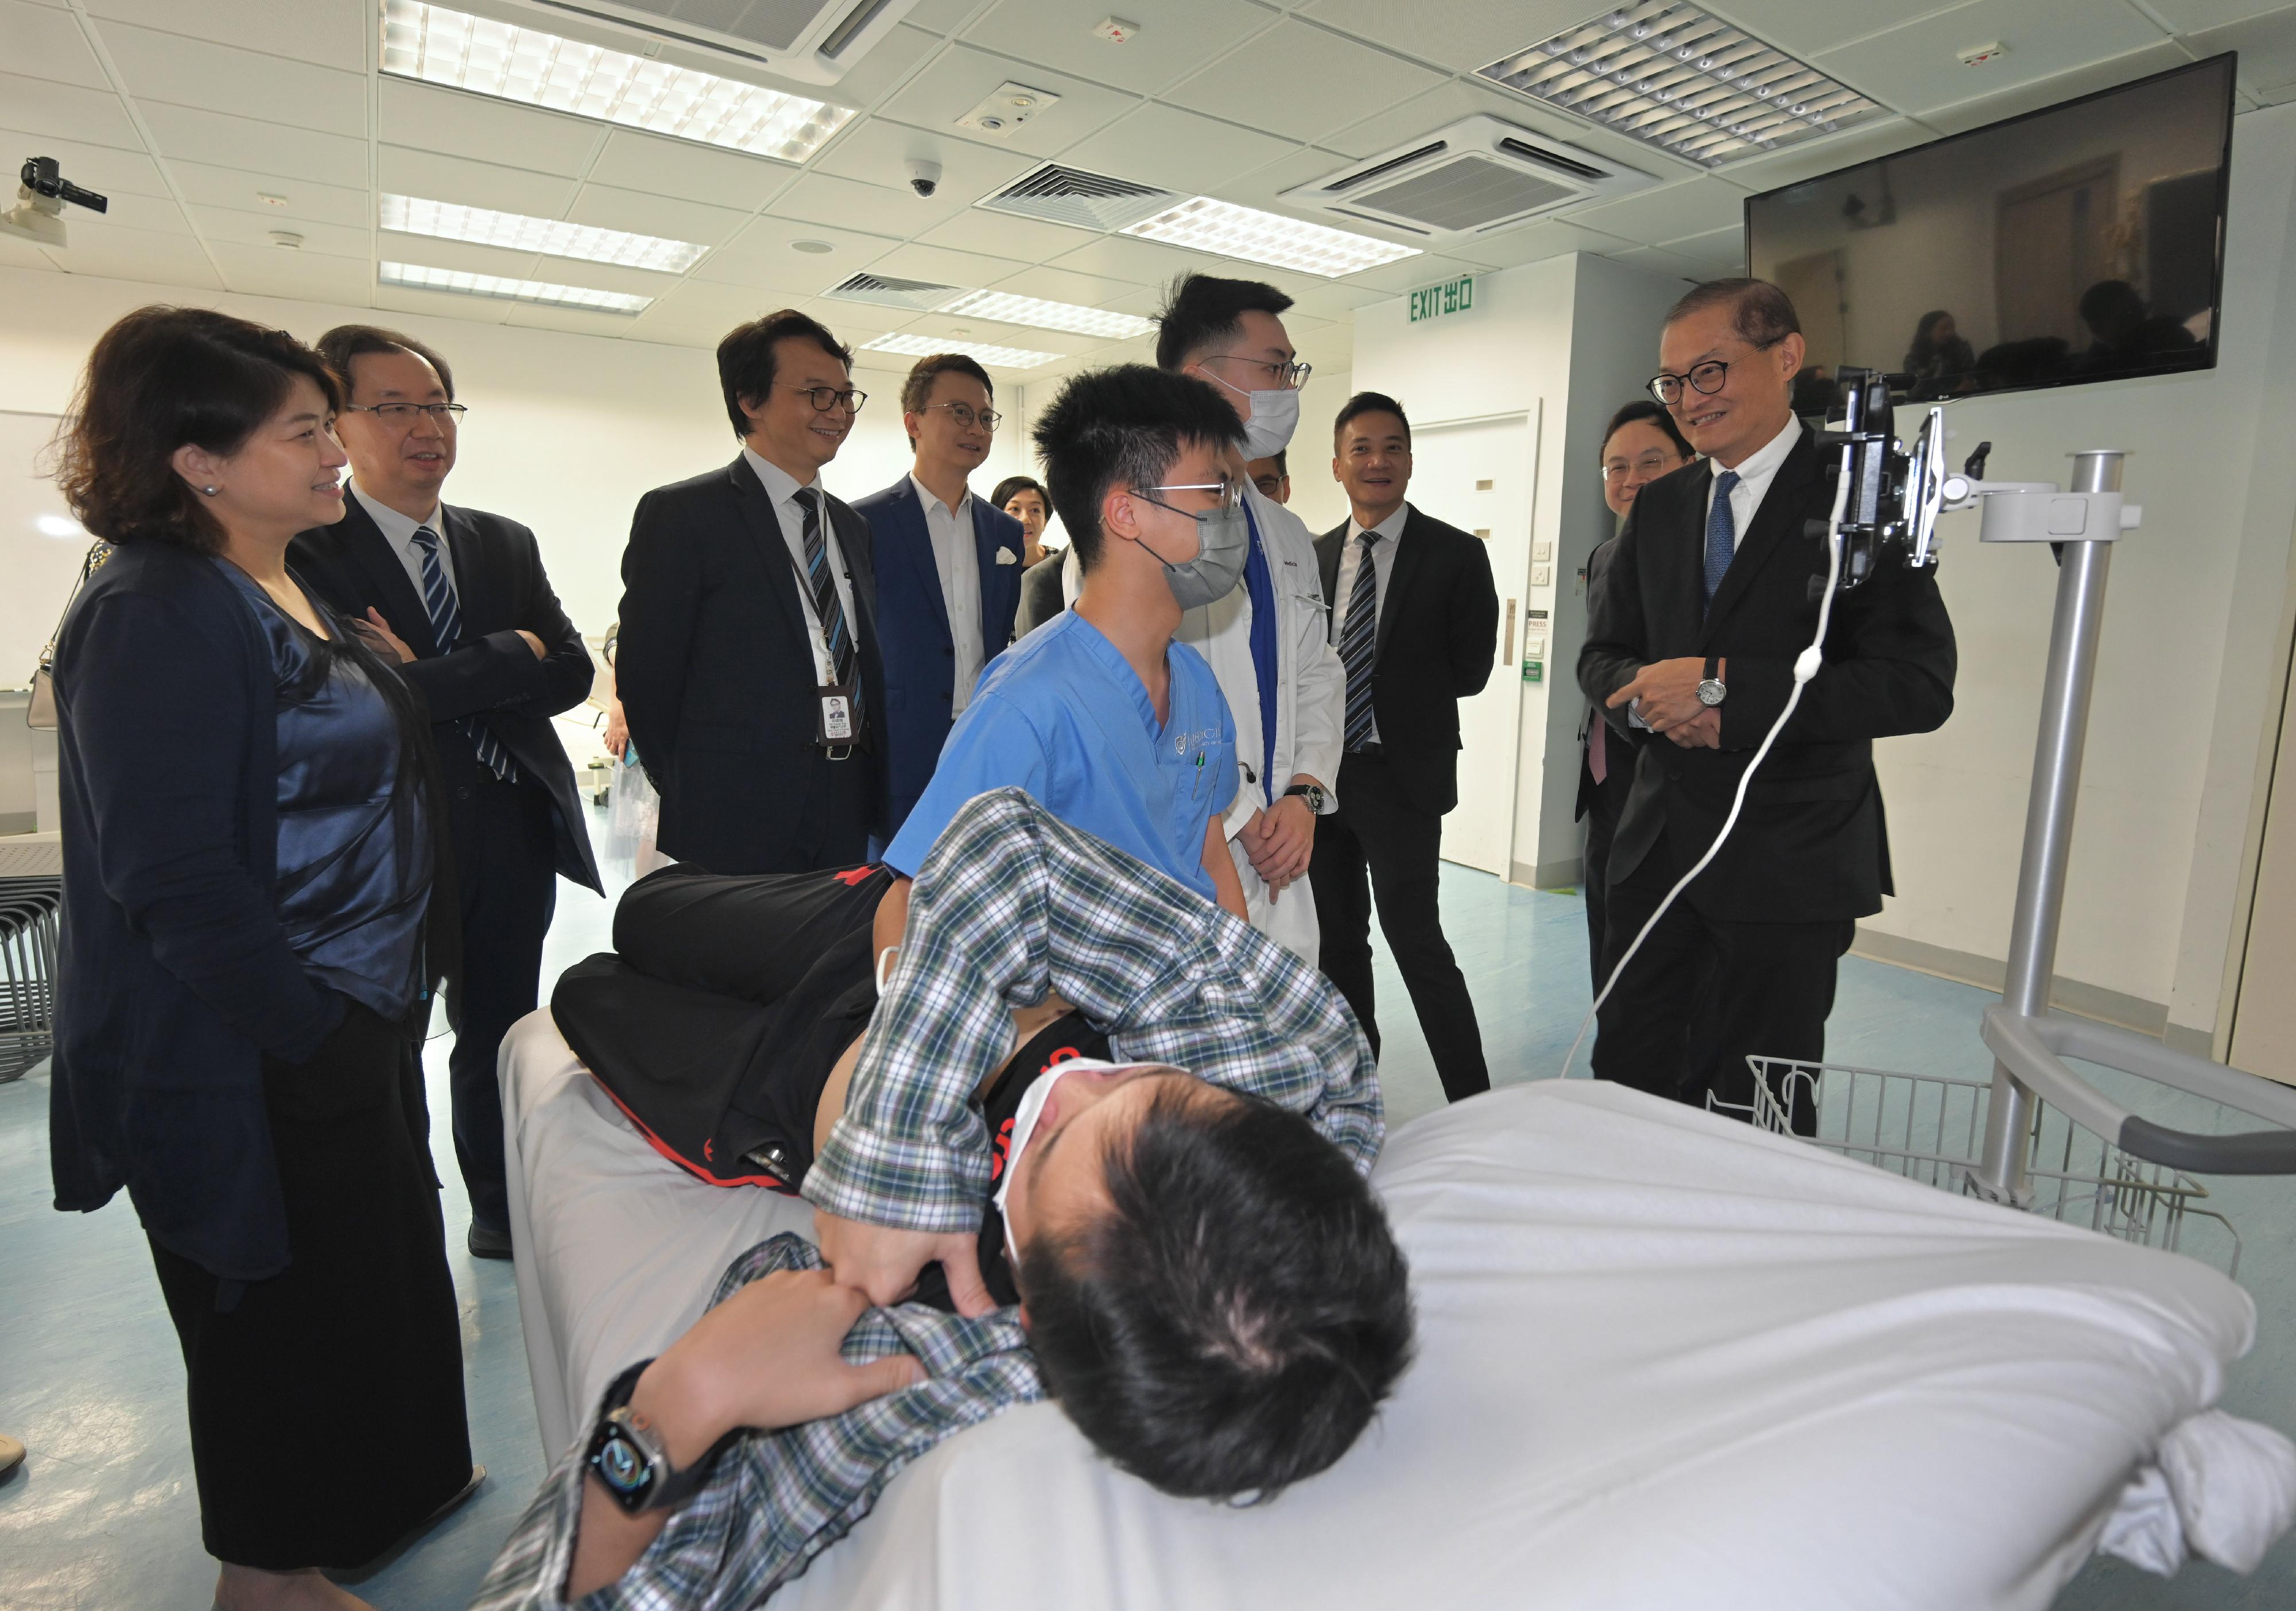 The Secretary for Health, Professor Lo Chung-mau, visited the Faculty of Medicine of the Chinese University of Hong Kong today (September 21). Photo shows Professor Lo (first right) and the Under Secretary for Health, Dr Libby Lee (first left), visiting the Kai Chong Tong Clinical Skills Learning Centre situated at Prince of Wales Hospital to get a better grasp of clinical skills teaching.